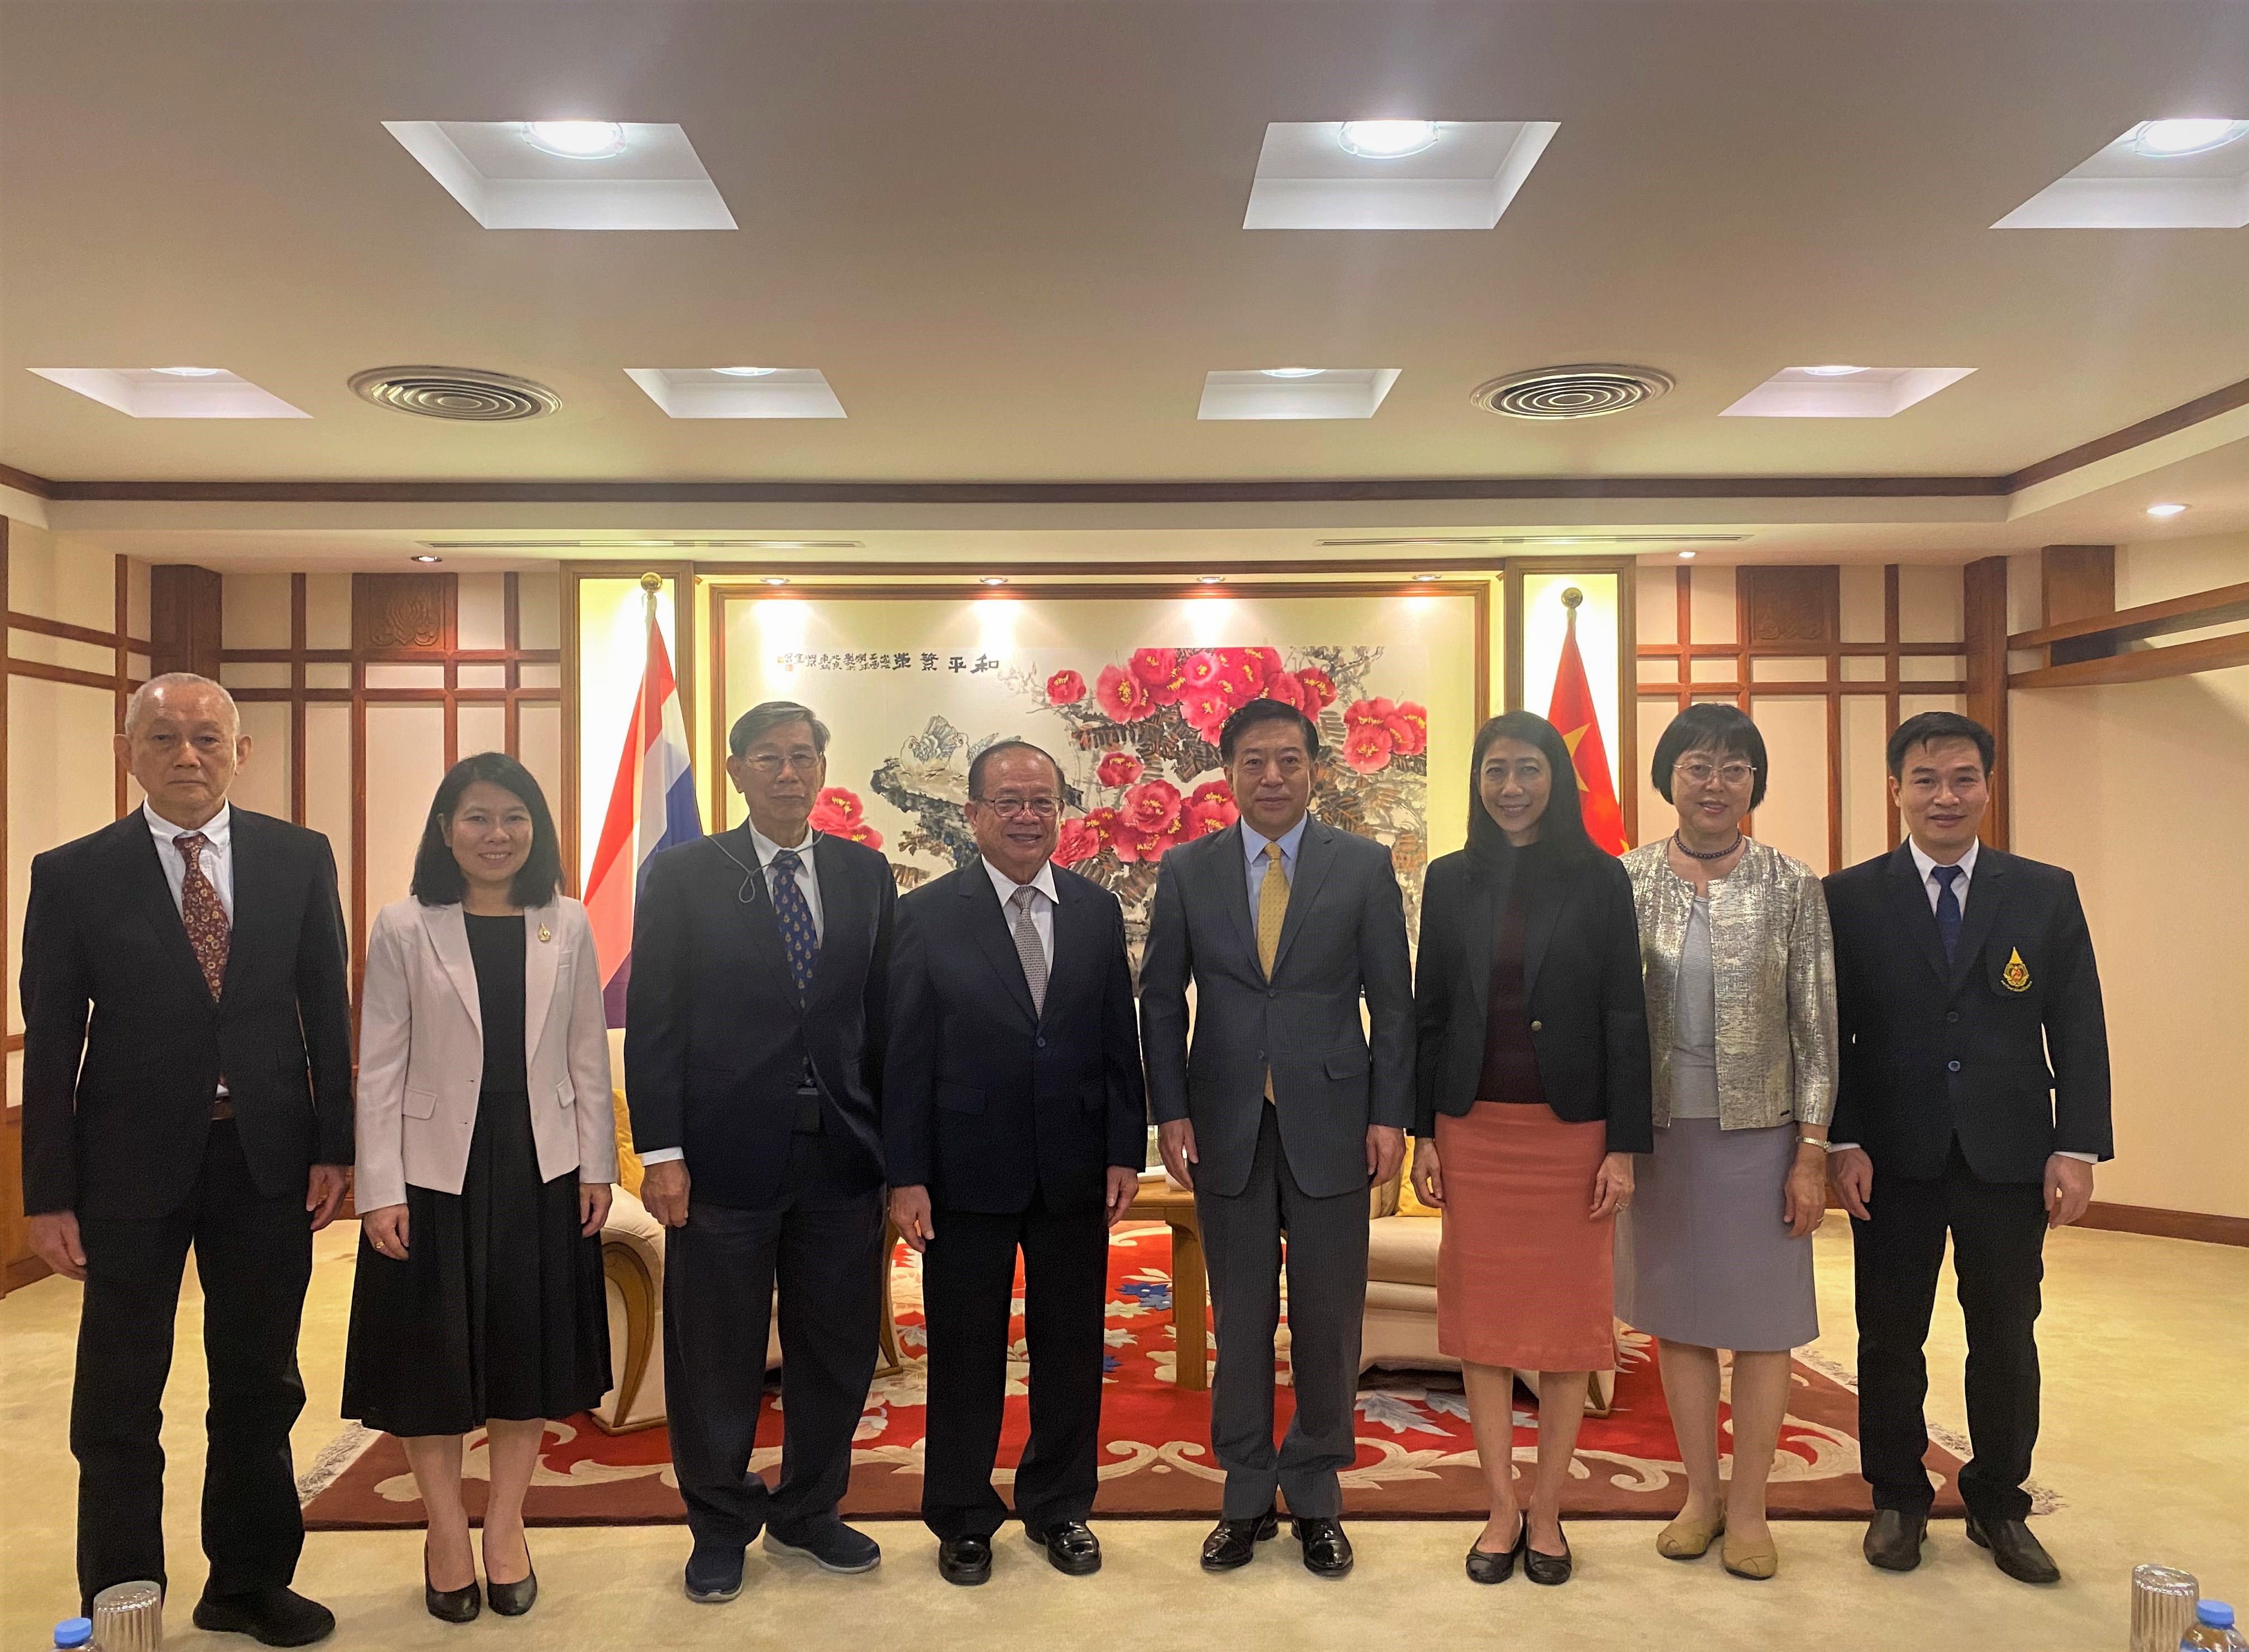 A Visit to the Embassy of the People’s Republic of China in Bangkok for Deepening Collaboration